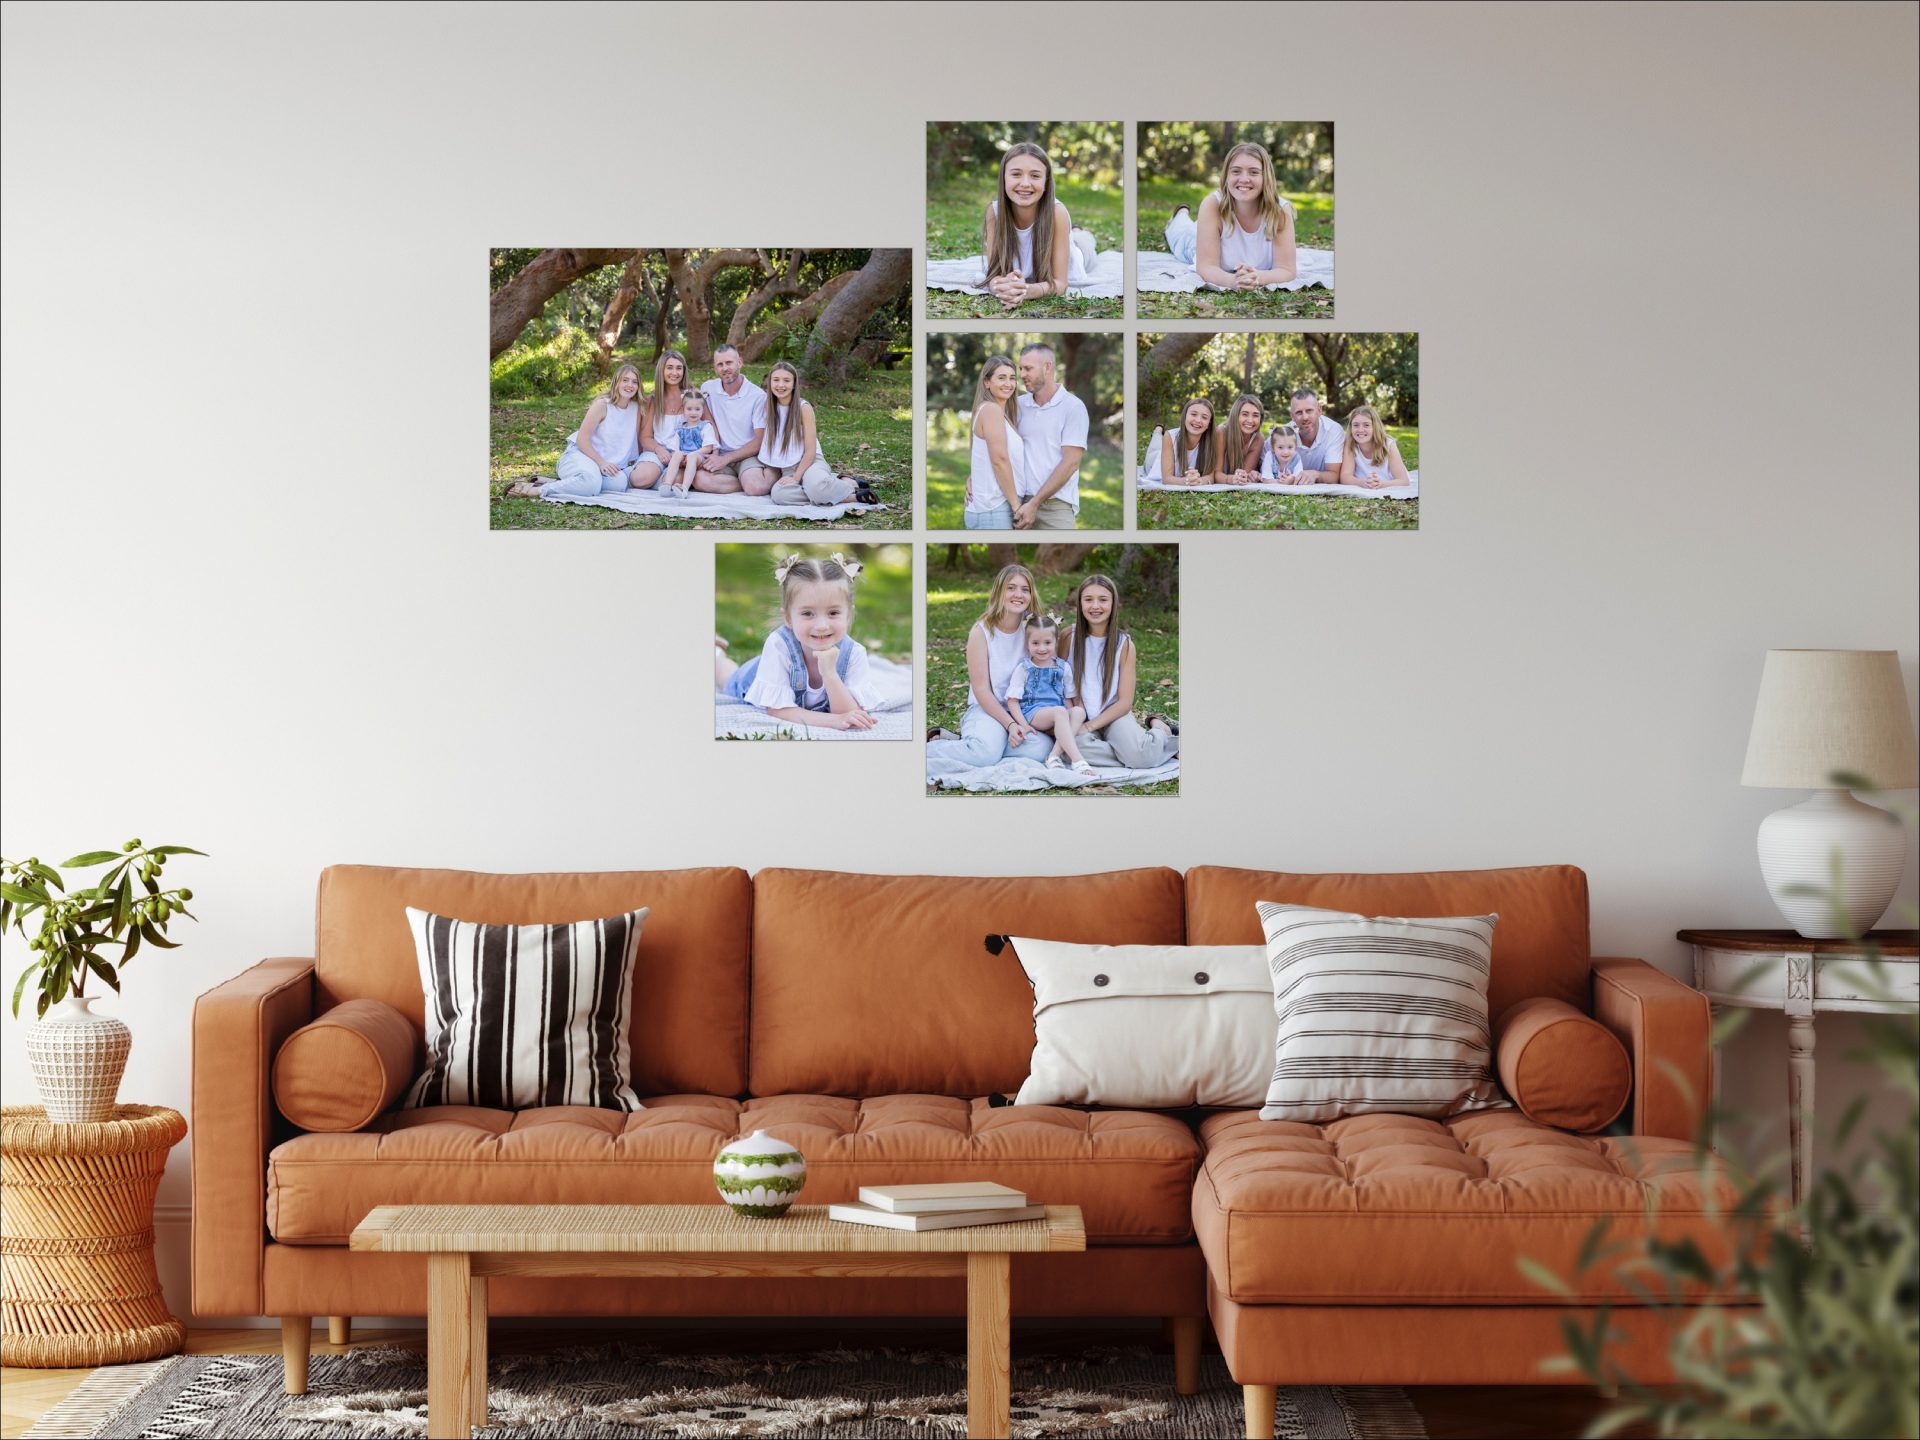 Maitland Photographer's Guide to Hanging Frames at Home